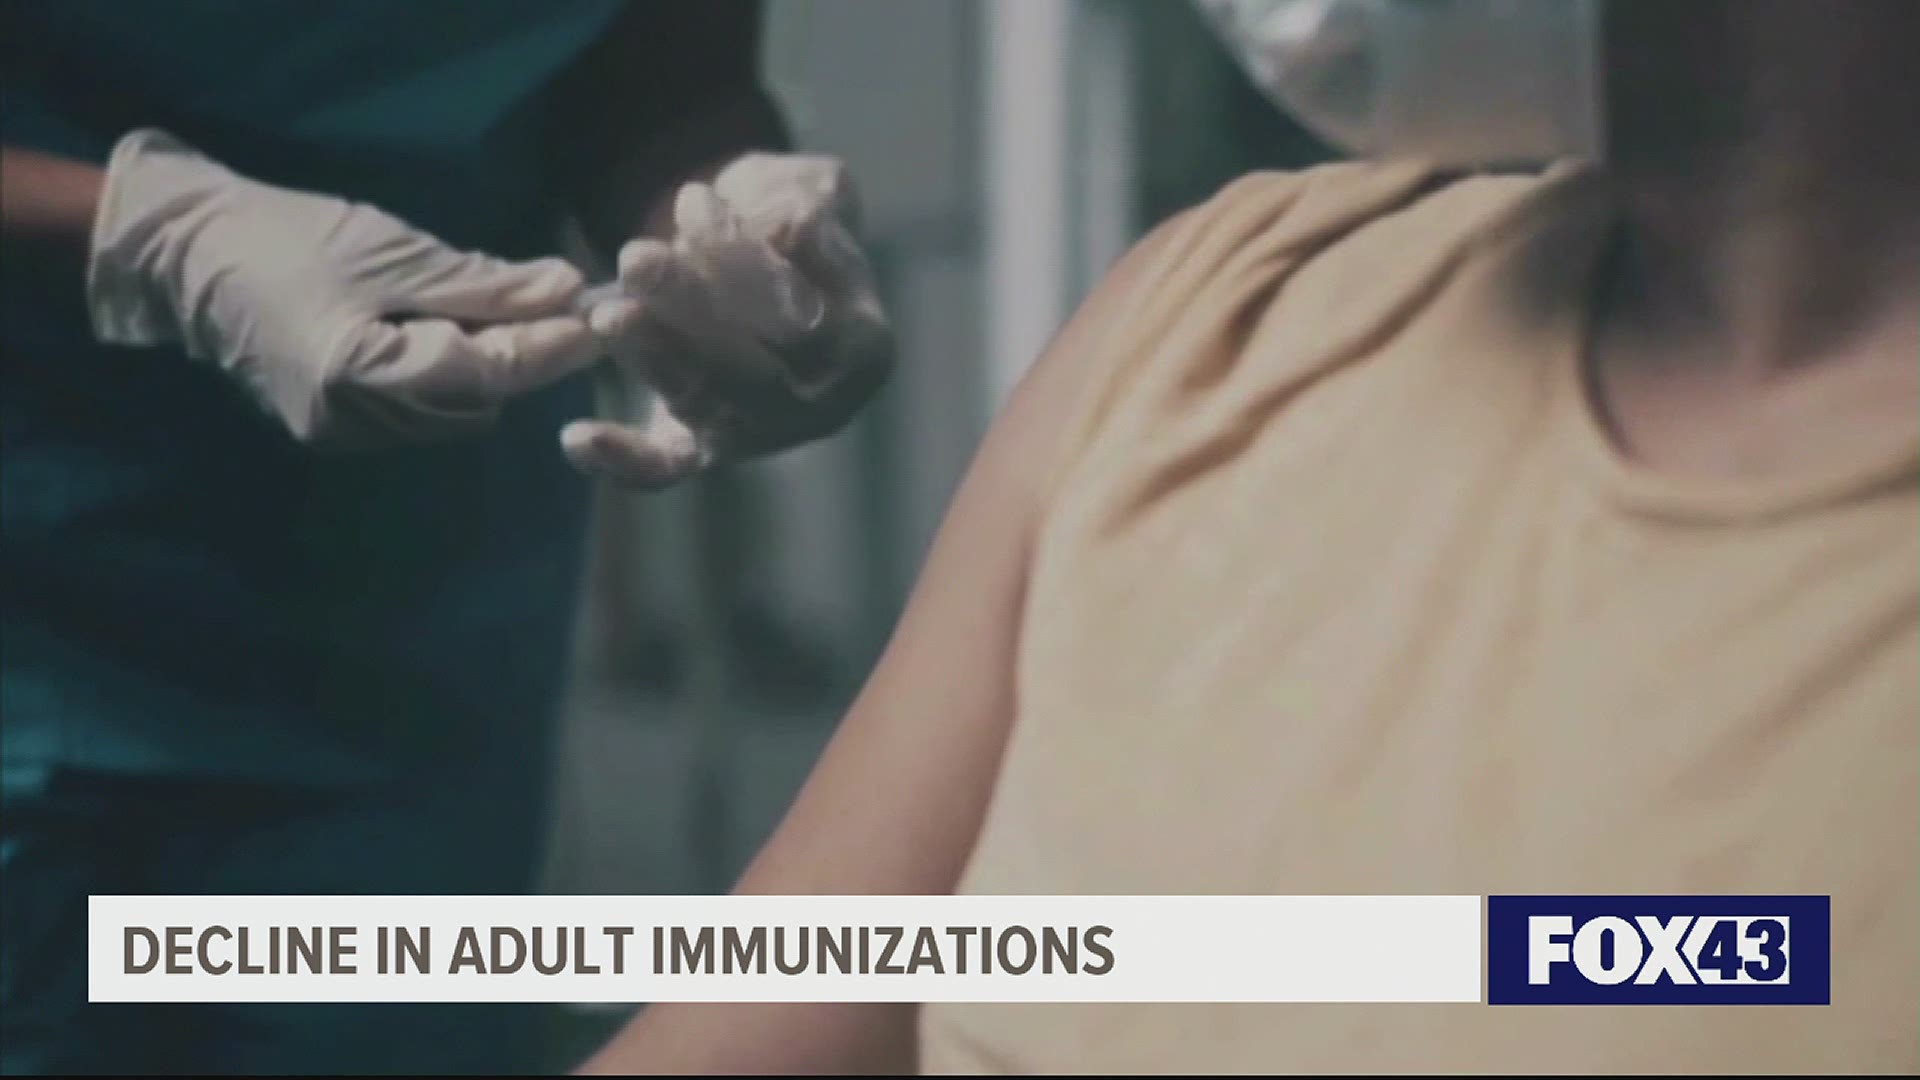 Dr. LaTasha Perkins, of Georgetown University Student Health spoke with FOX43 about a steep decline in non-COVID-19 immunizations among older adults.